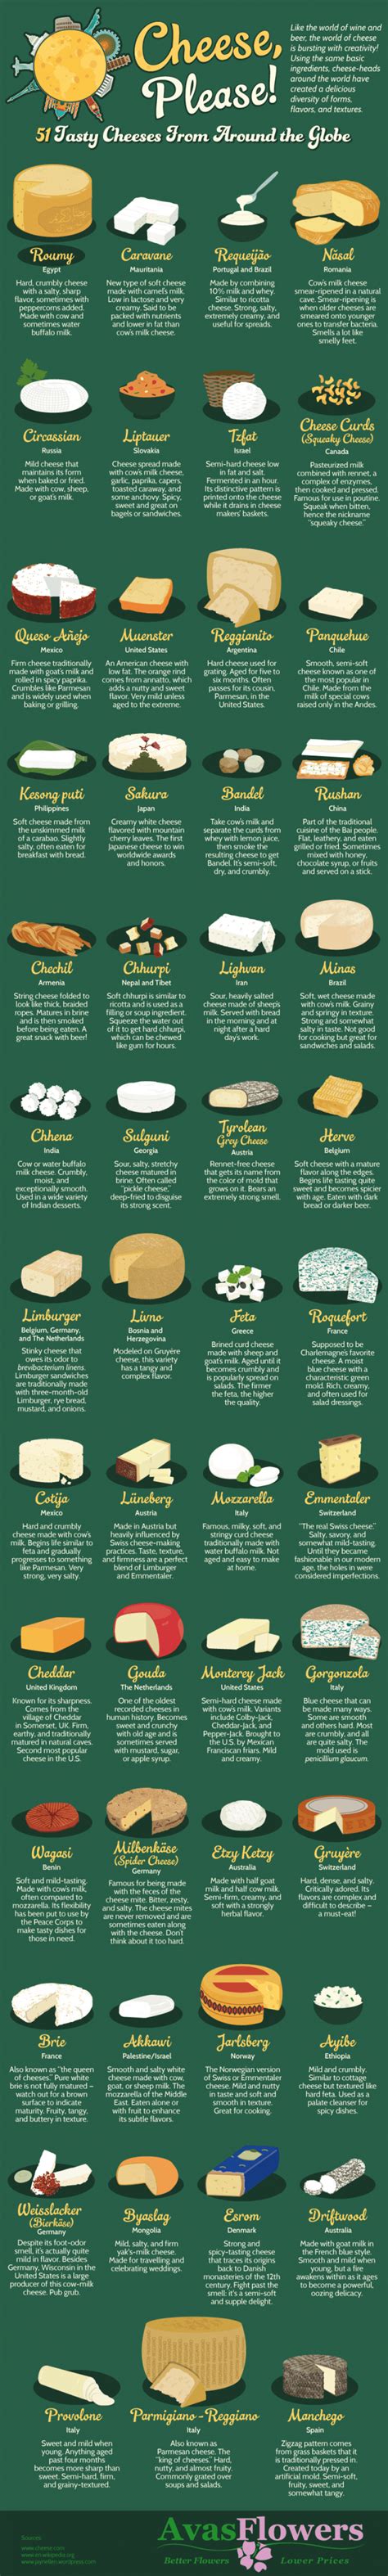 Its All Gouda 51 Cheeses From Around The Globe Daily Infographic